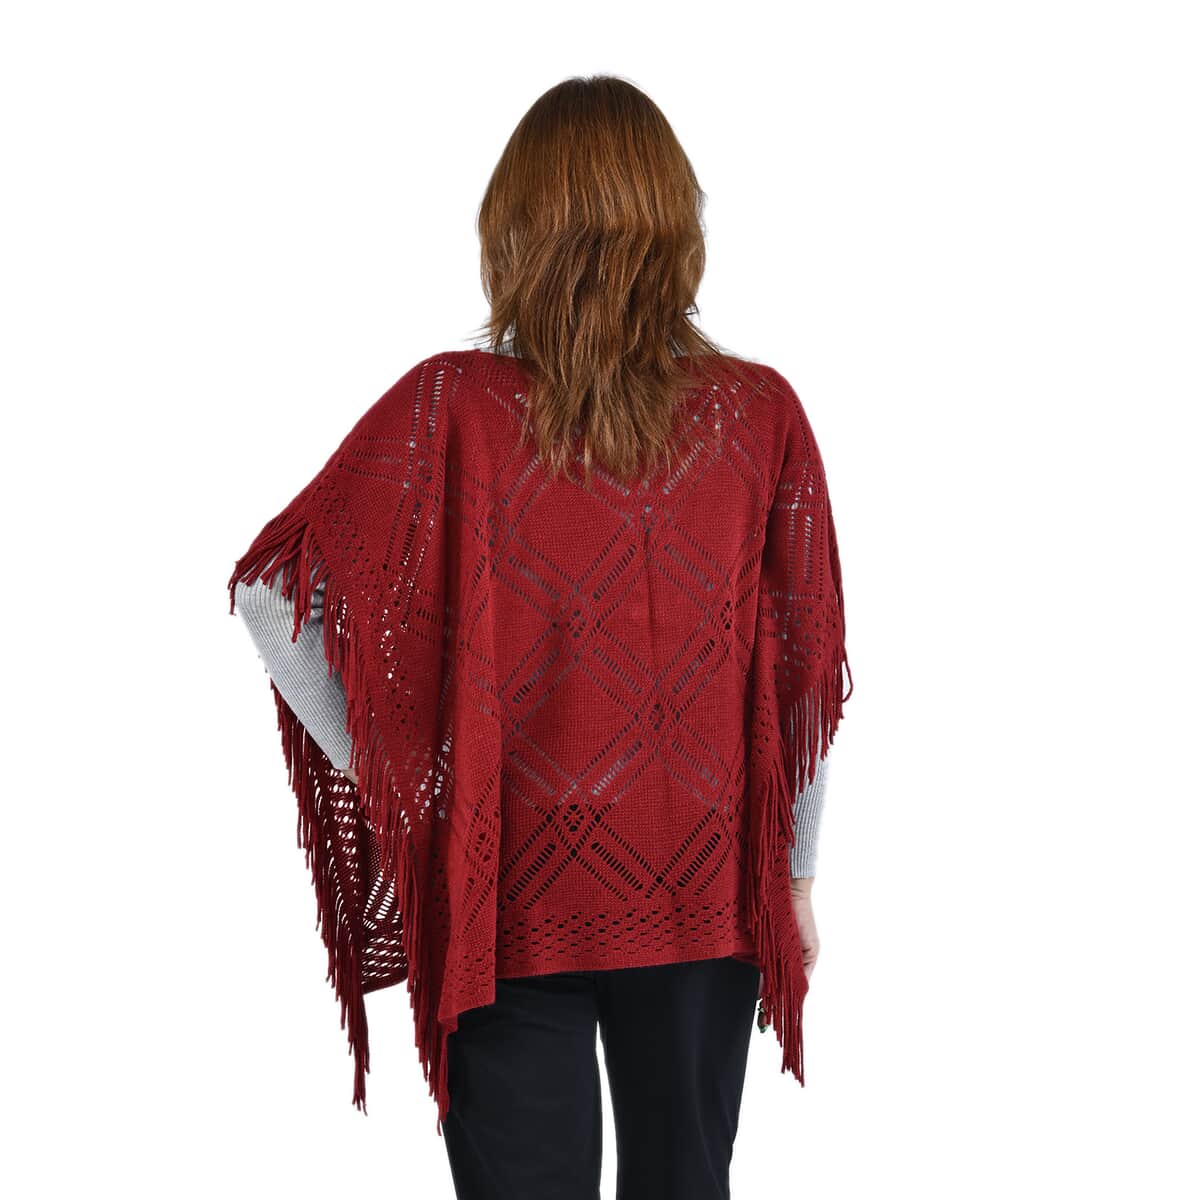 Passage Knitted Burgundy Poncho with Tassels (One Size Fits Most) image number 1